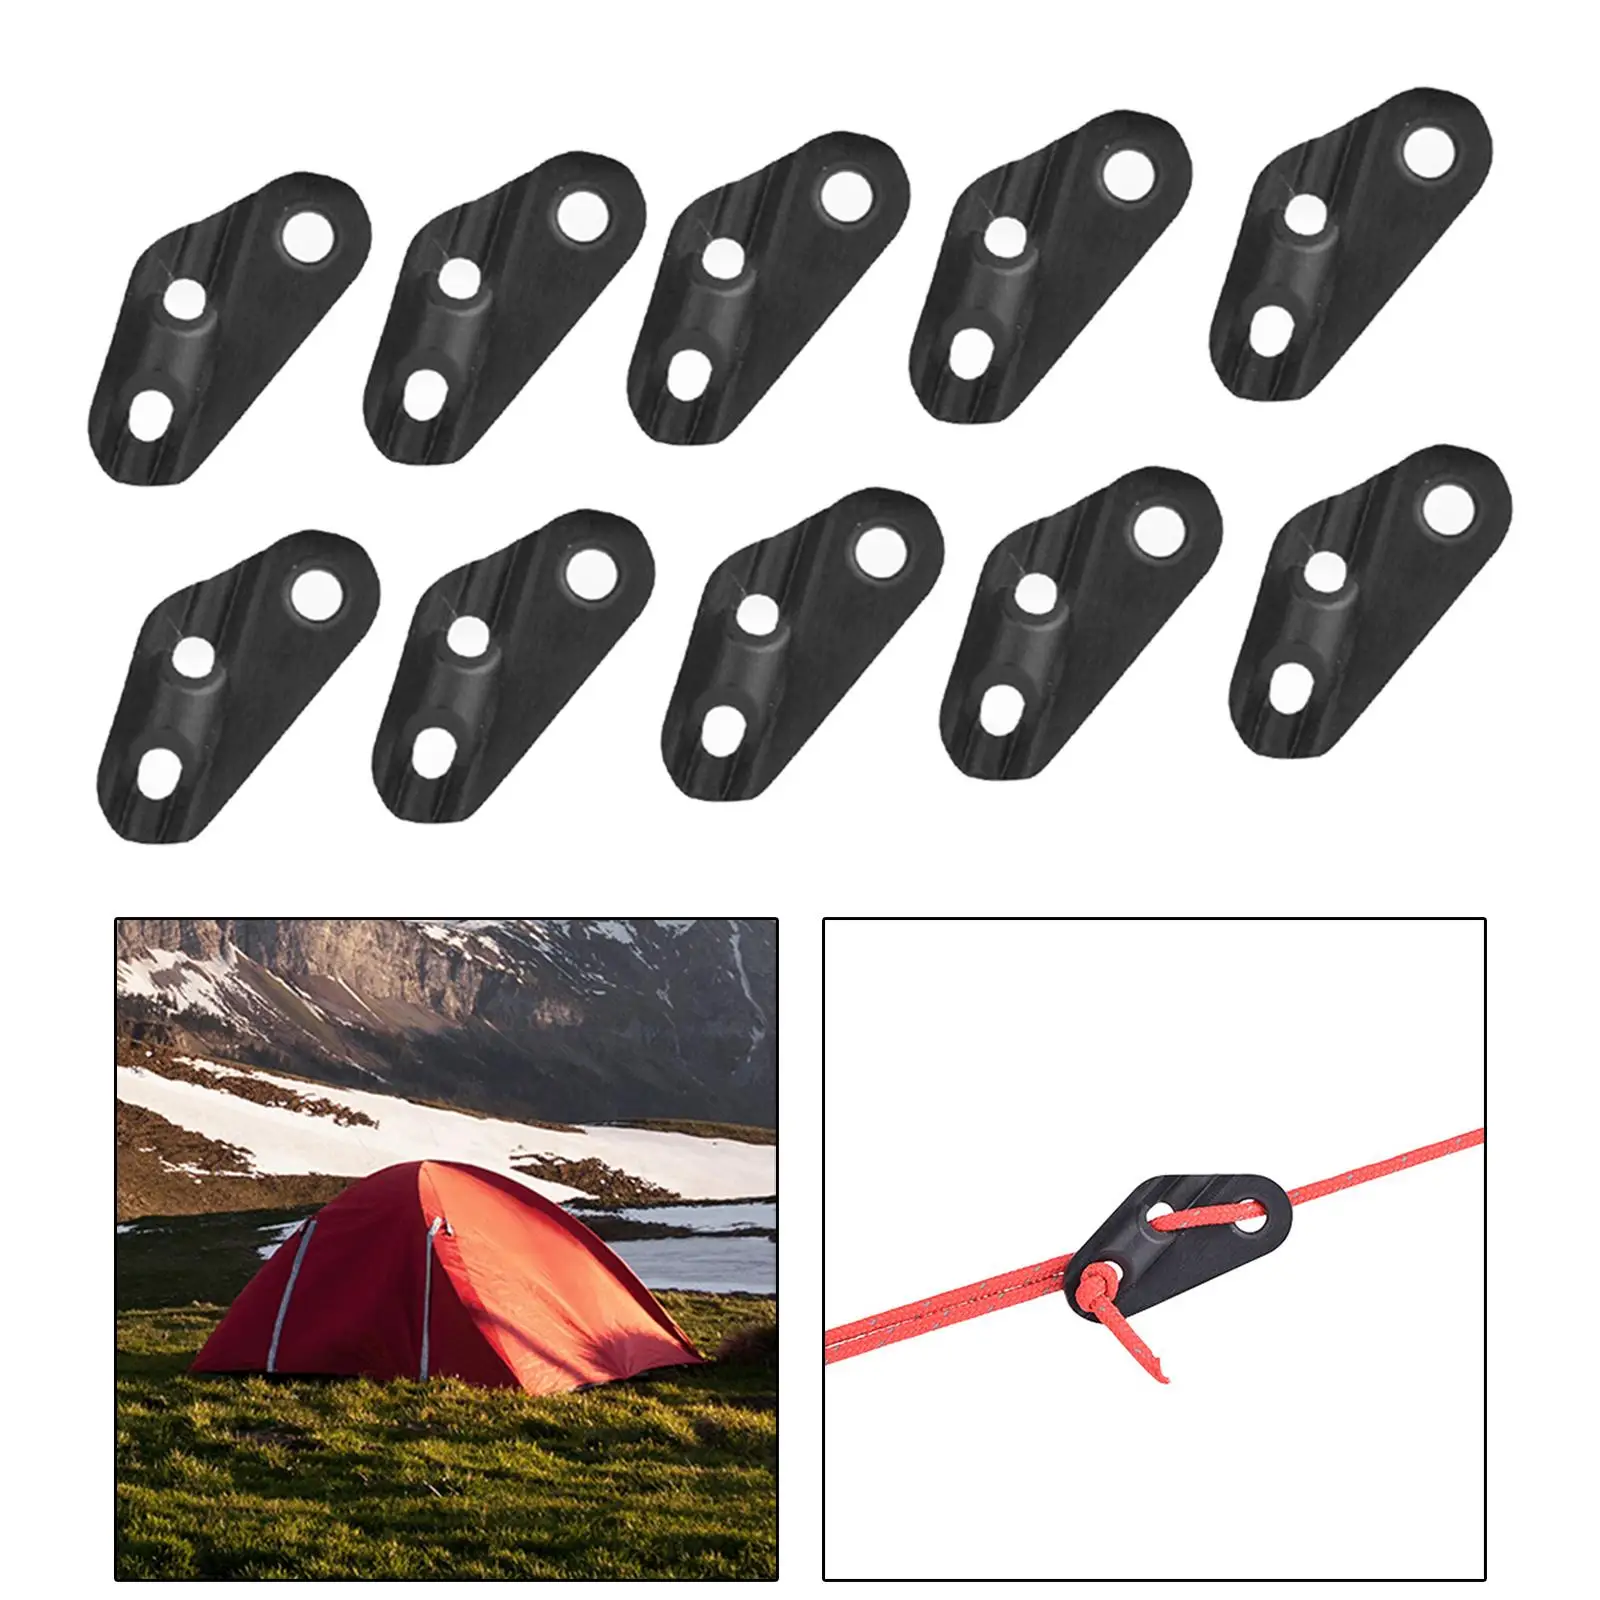 

10Pcs Tent Wind Rope Buckles Triangle Tent Buckle Wigwam guyline Cord Adjusters for Sky Curtain Backpacking Outdoor Activities